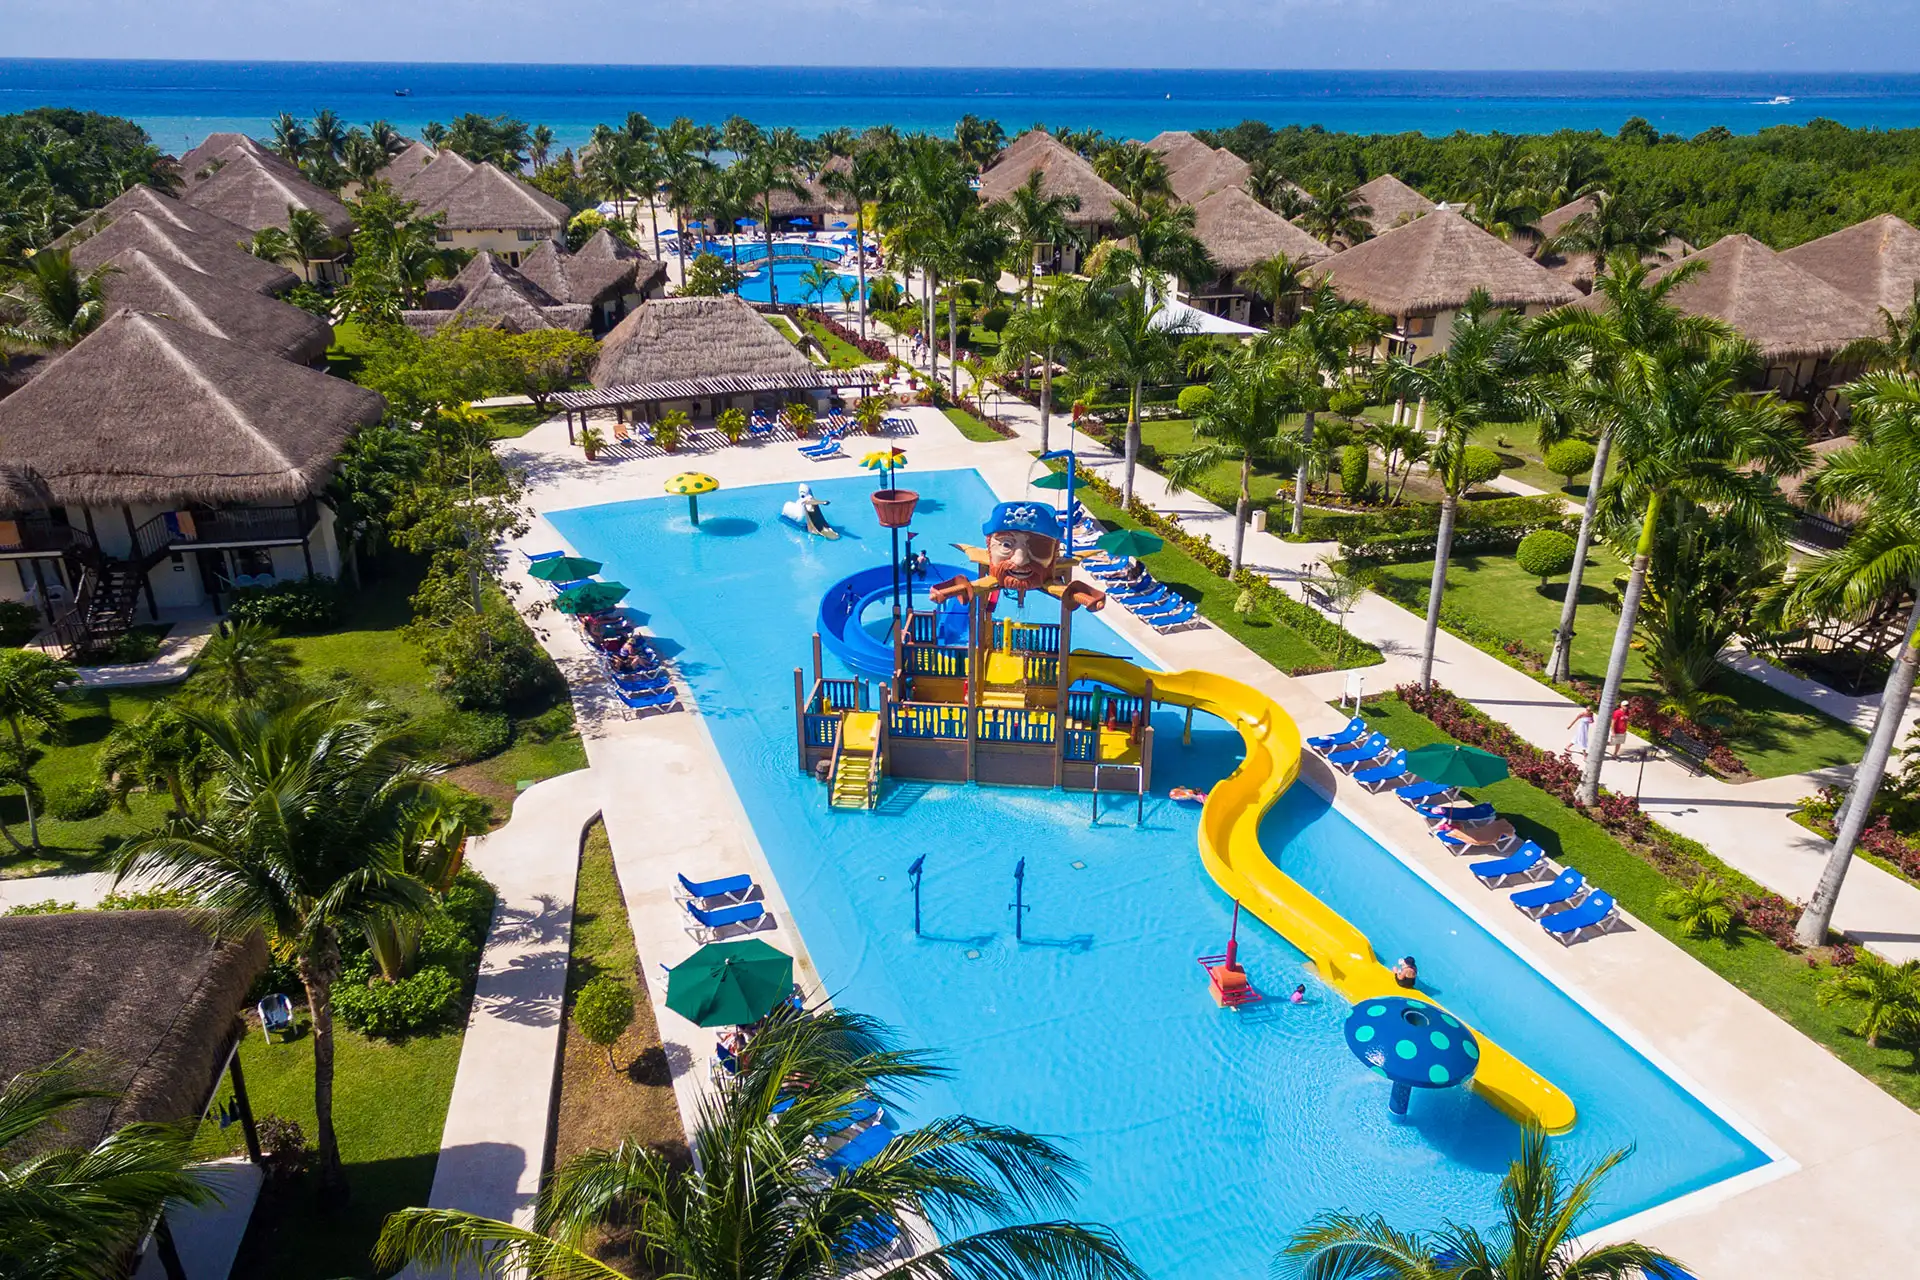 Water Park at Allegro Cozumel in Mexico; Courtesy of Allegro Cozumel